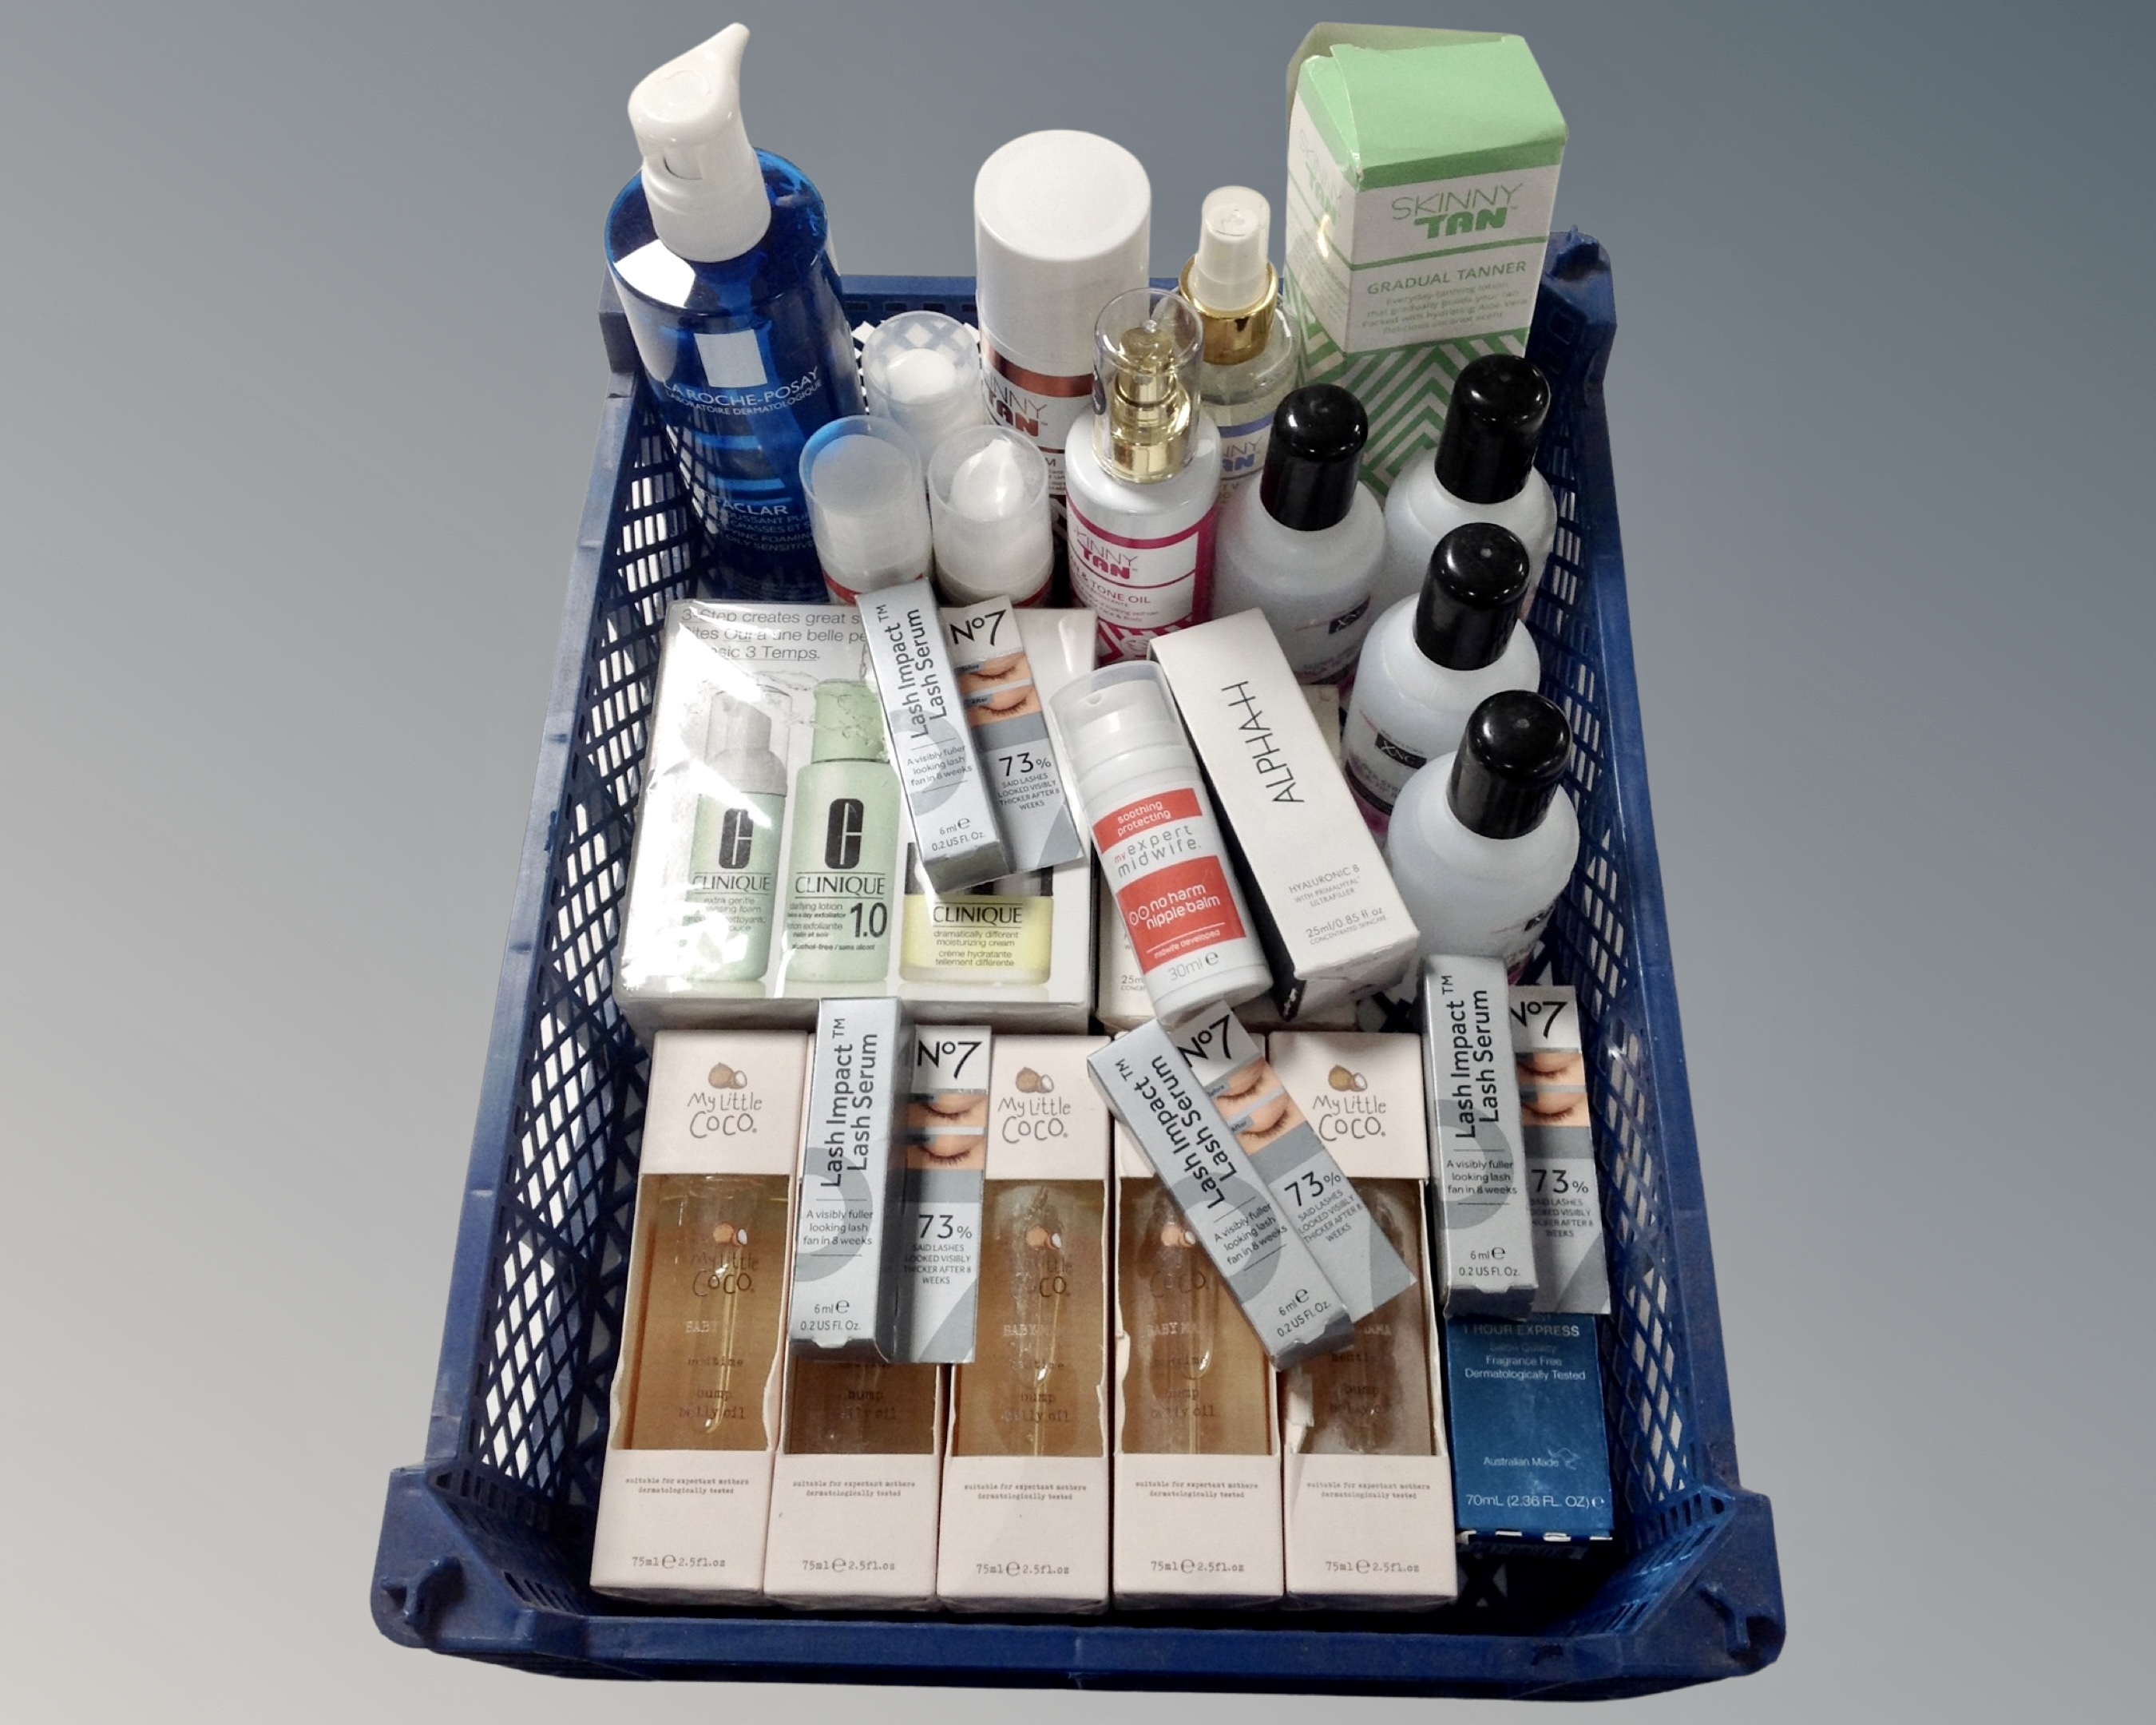 A crate of cosmetics, Number 7 Lash Serum, Tan and Tone oils, Balms, Cleansing foams,